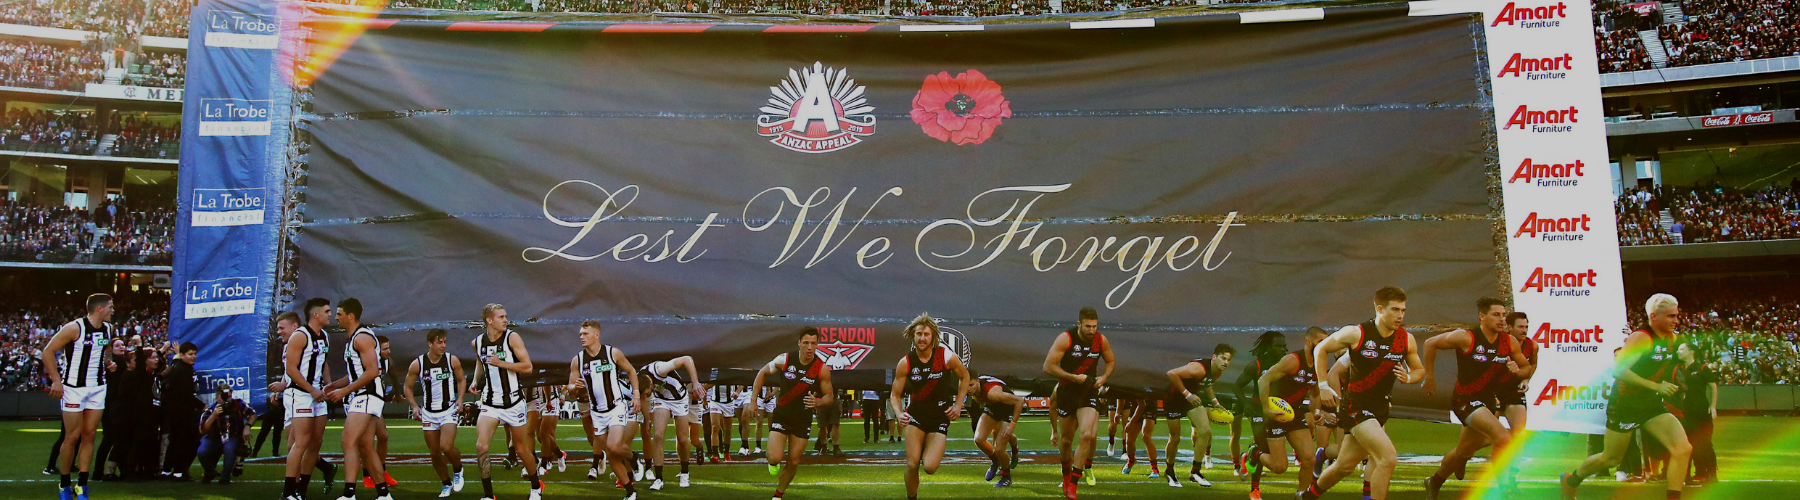 Essendon and Collingwood run through the ANZAC Day banner